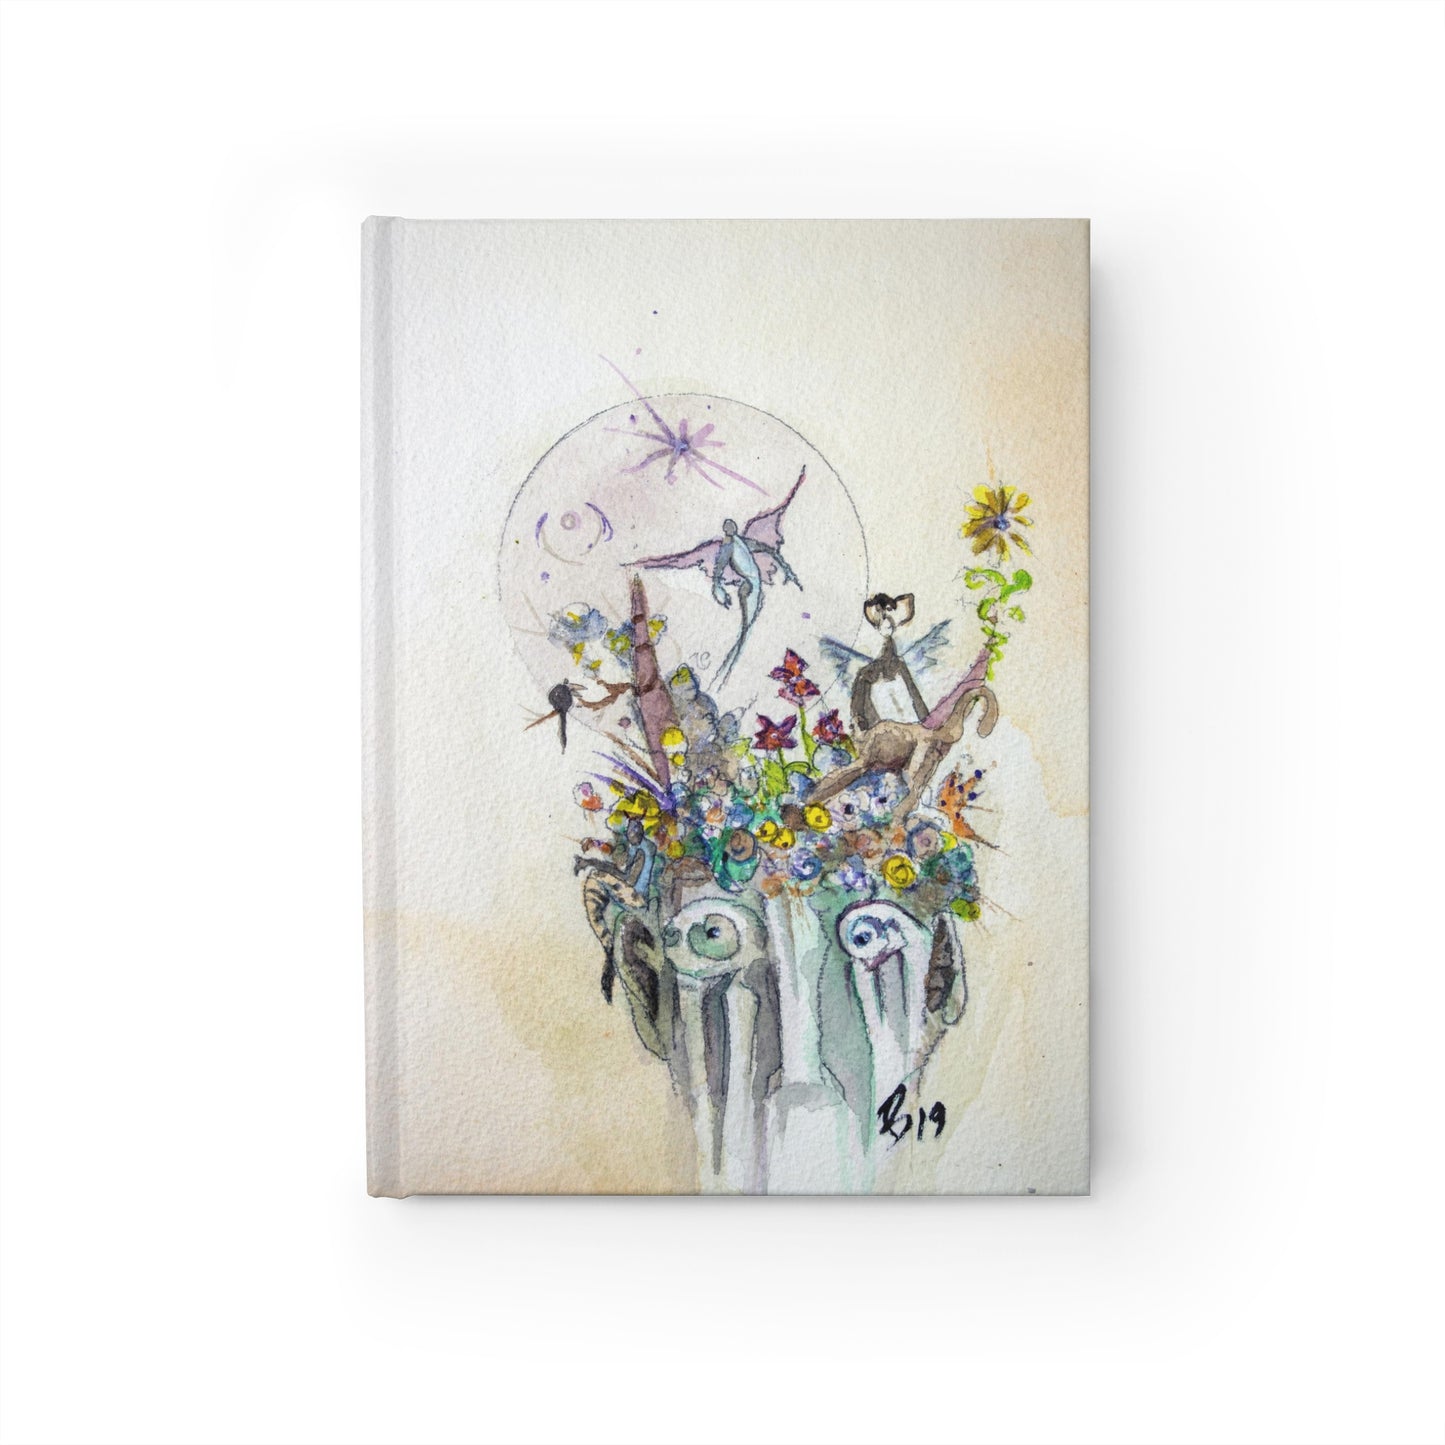 Whispered Dreams Lucid Life Logbook - J. Wesley Bailey IV Watercolor Art, 128 Blank Pages, Dream Journal & Creative Notebook, Hardcover